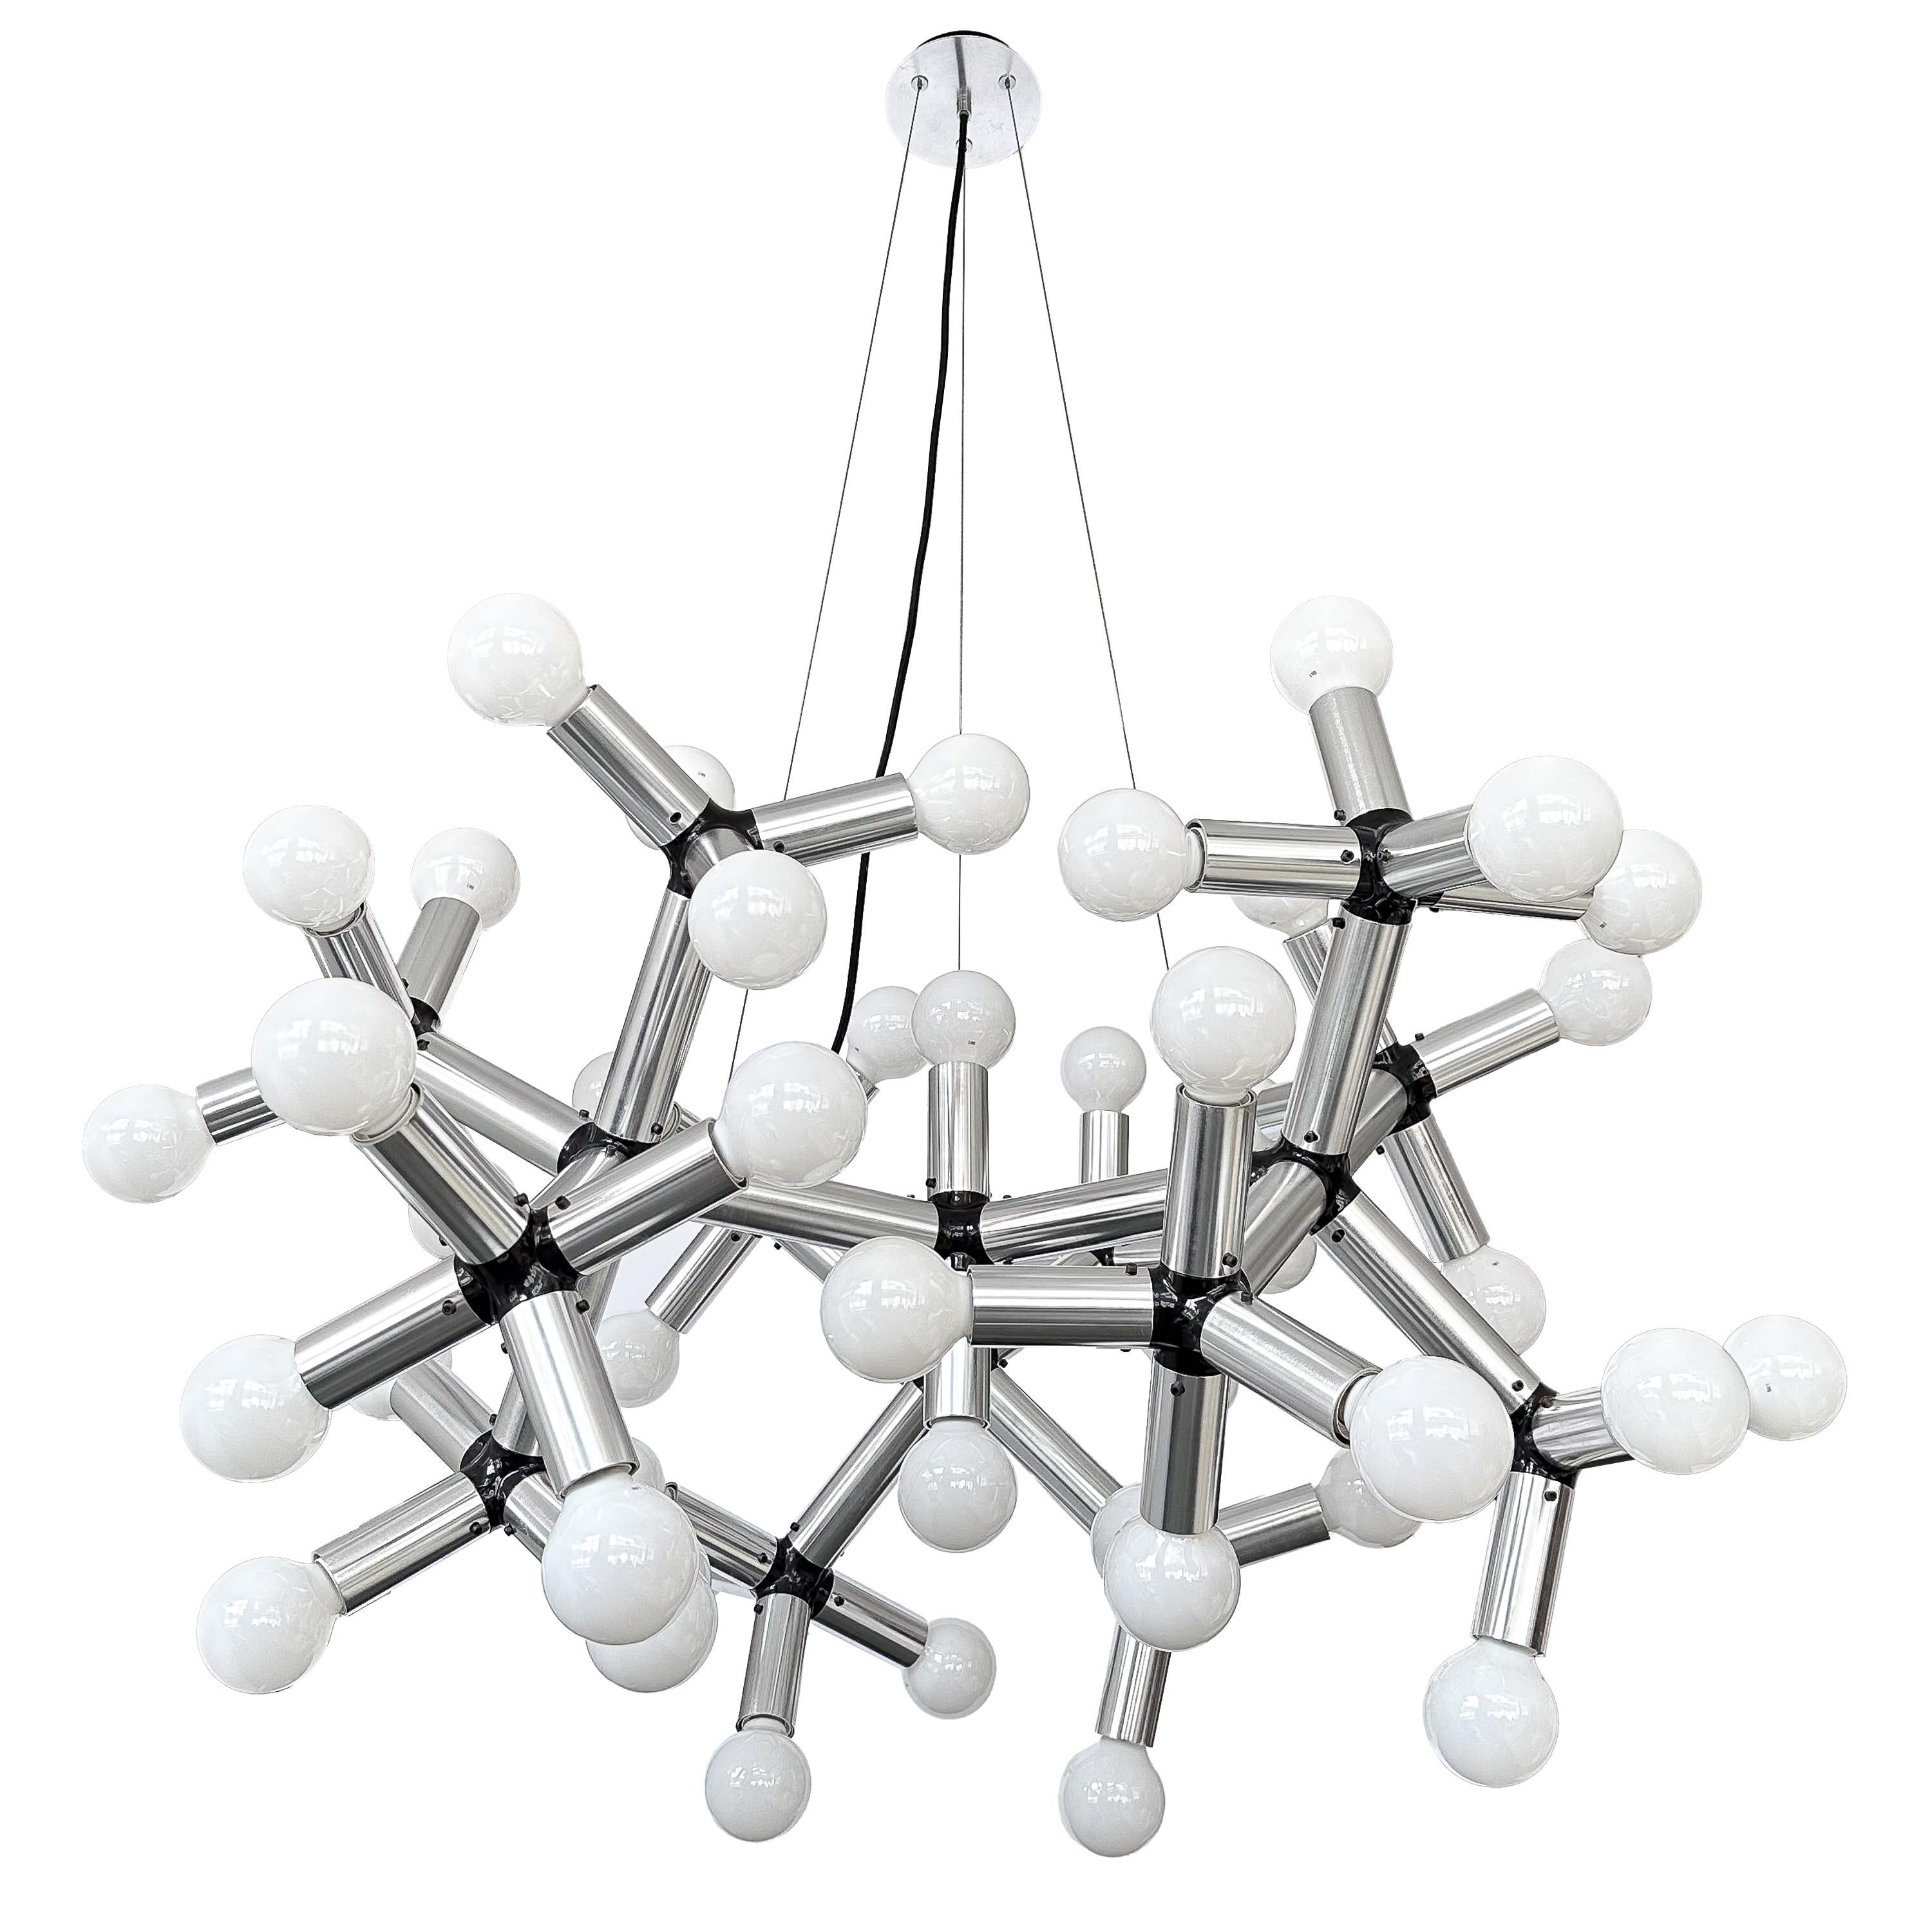 Step into a world where art meets function in the most sublime way with this rare monumental 50 light suspension chandelier by Robert Haussmann, Switzerland circa 1970s. With its distinctive molecular design and commanding presence, this chandelier